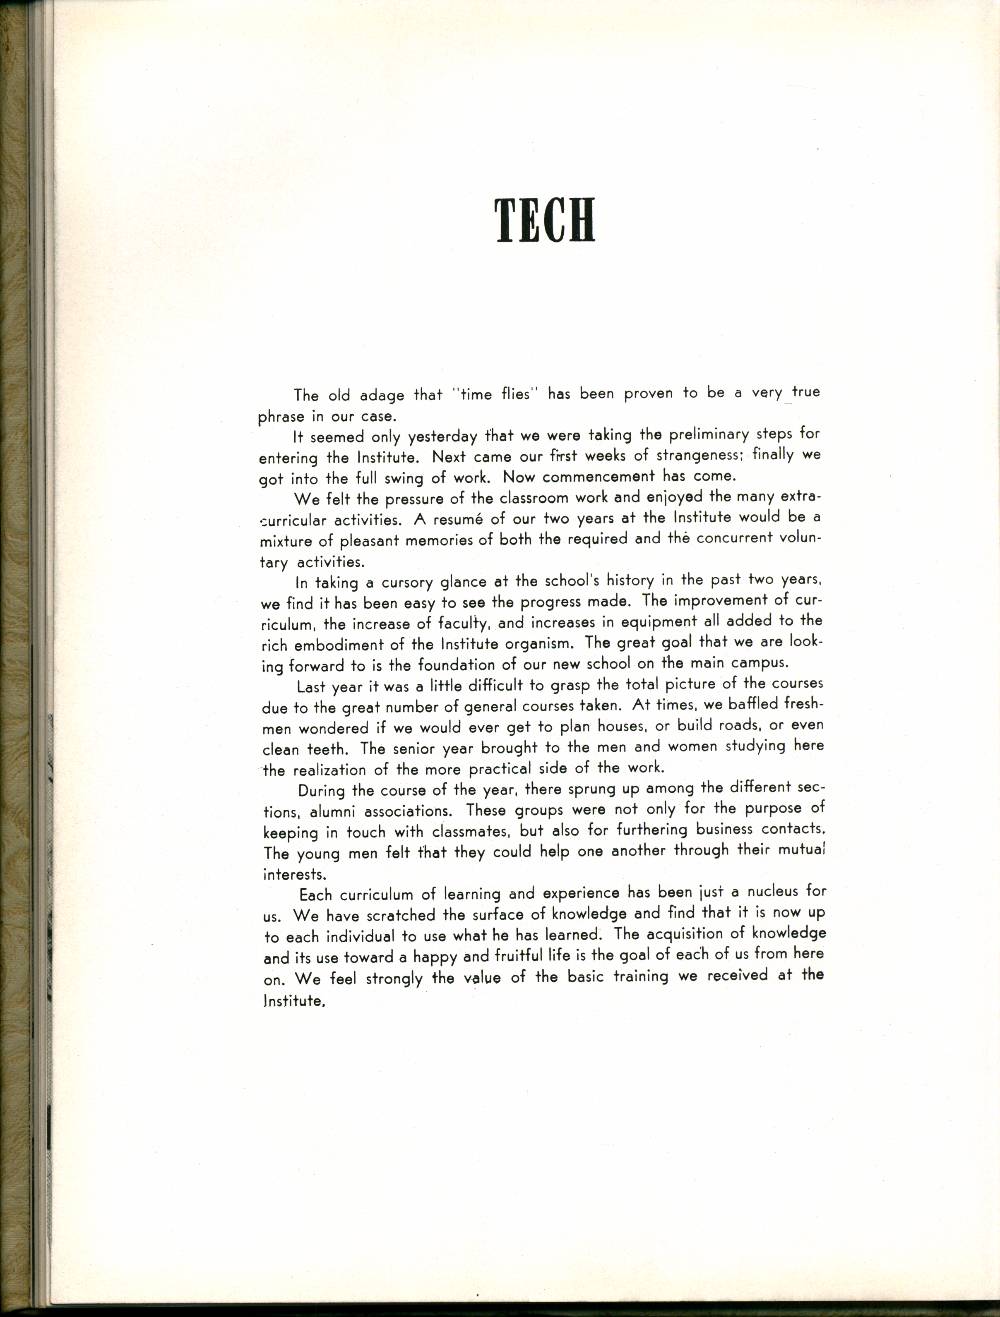 Write-up about the 'Tech Division' from "The Islander" yearbook in 1949